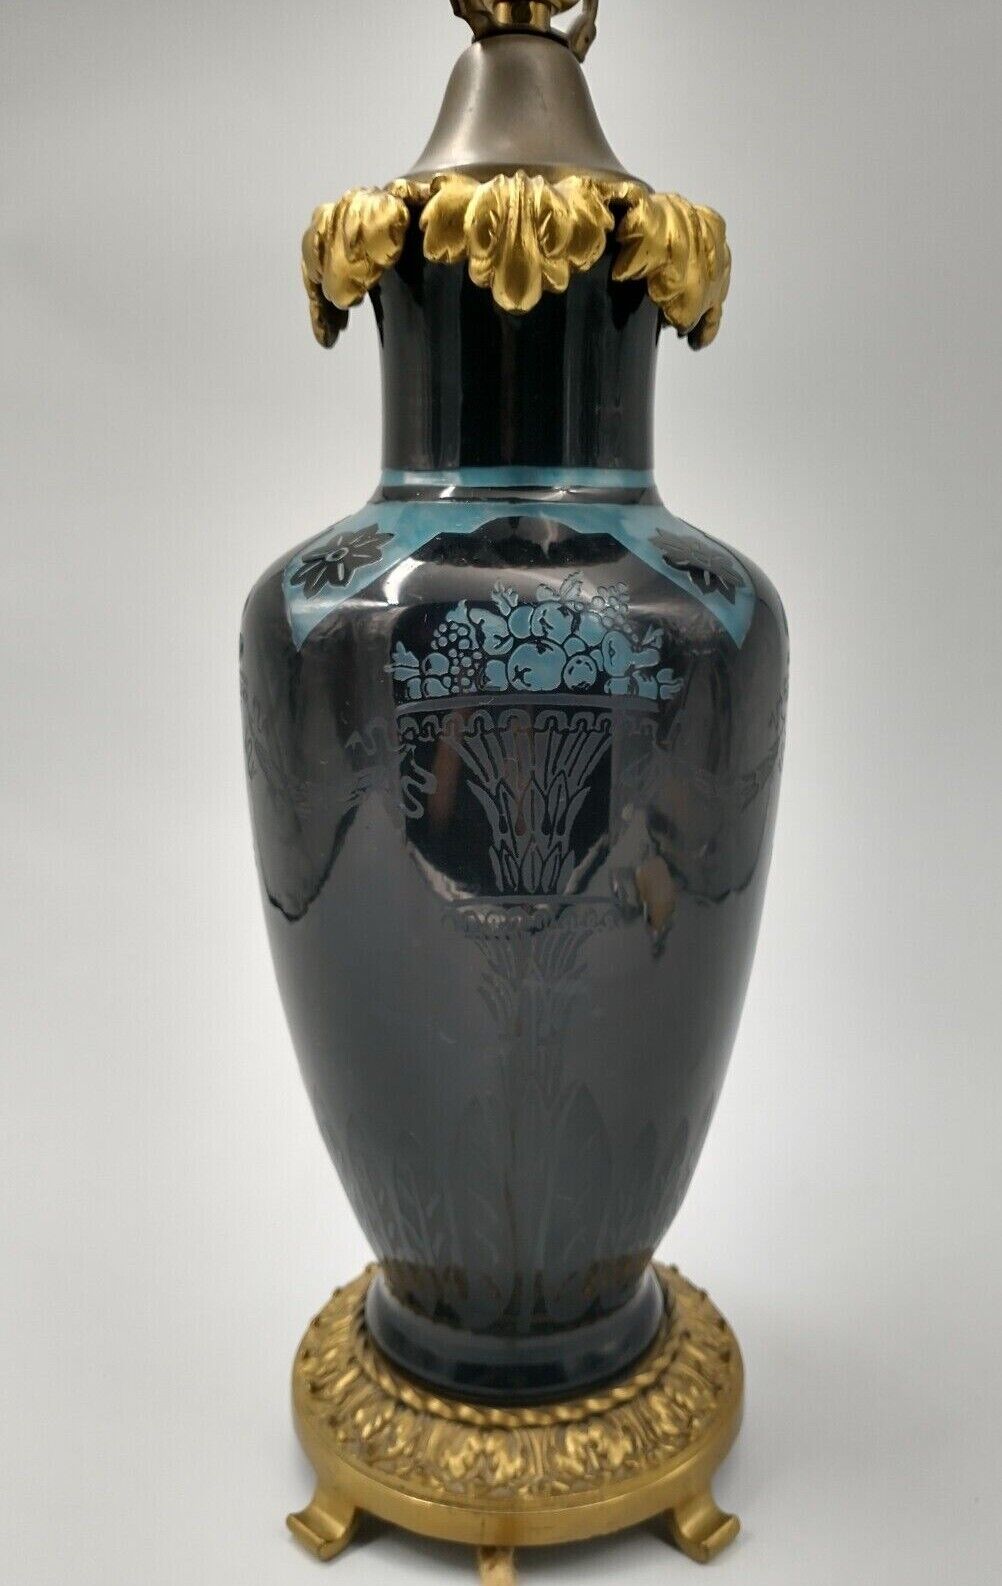 Steuben Black Acid Cutback to Teal Urns Harvest and Flames Table Lamp Rare